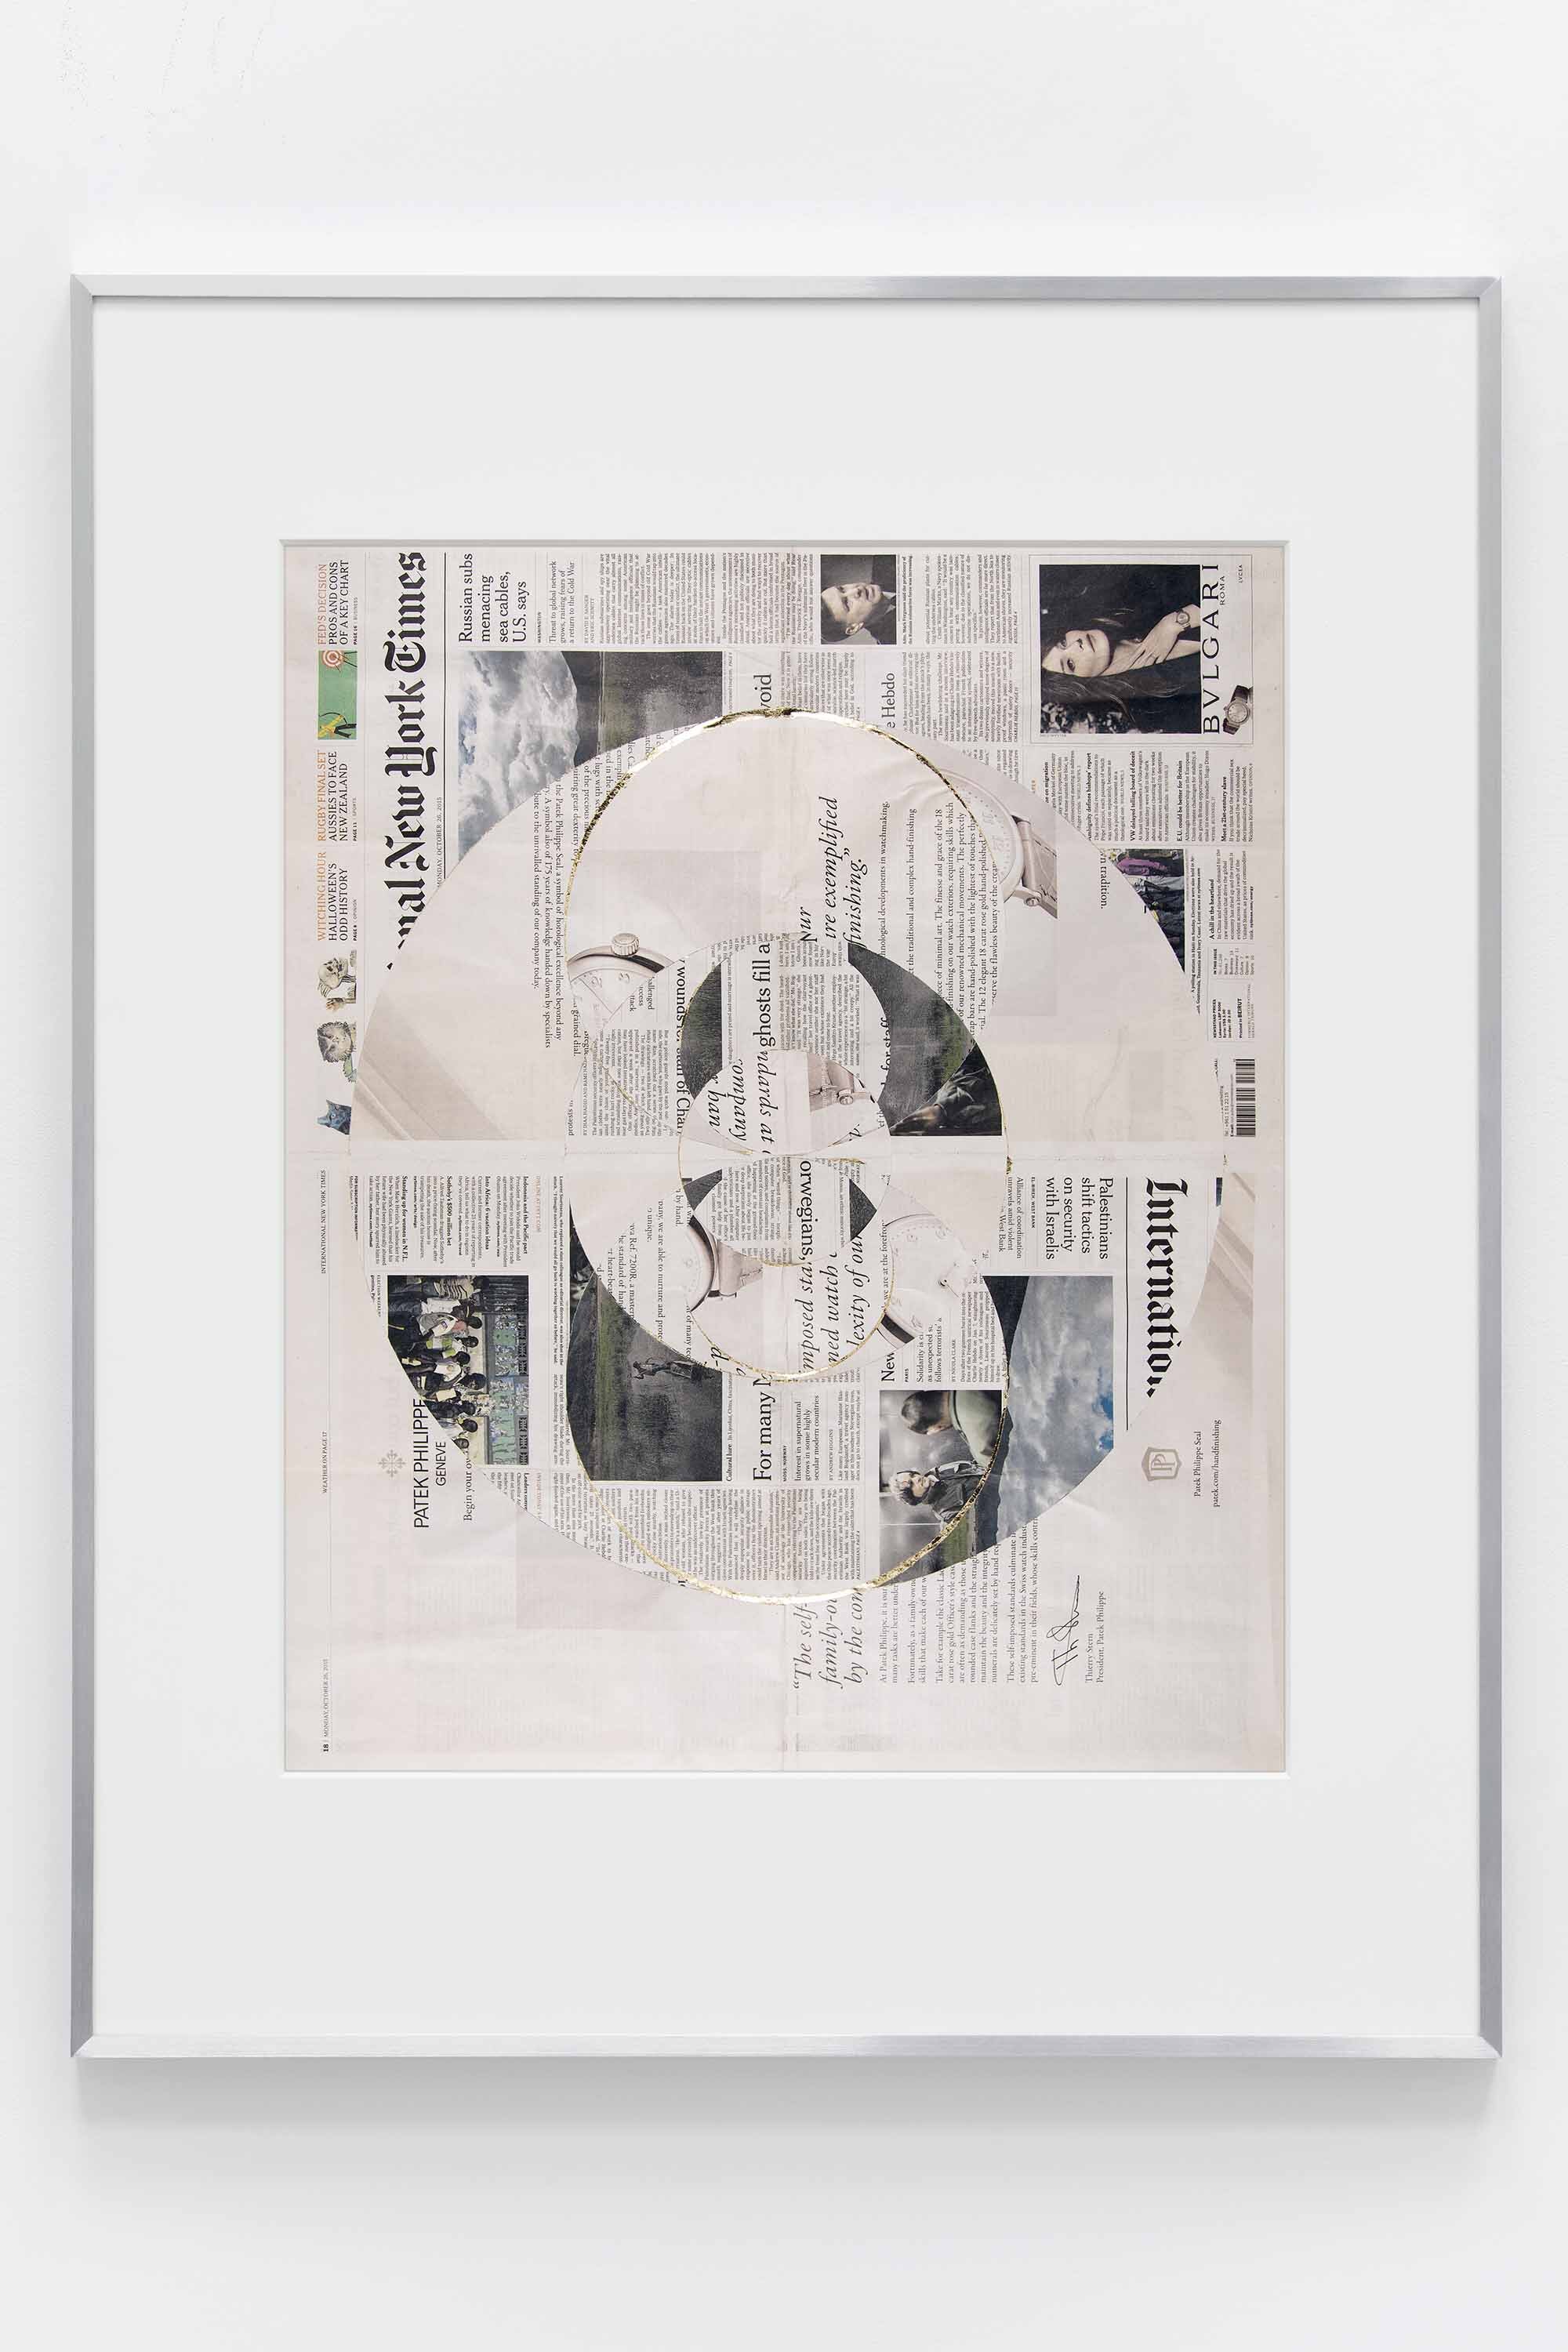   Blind Collage (Seven 180º Rotations, International New York Times: Beirut, Lebanon, Monday, October 26, 2015)    2021   Newspaper, tape, and 22 karat gold leaf  39 1/8 x 31 1/4 inches   Blind Collages, 2017–  